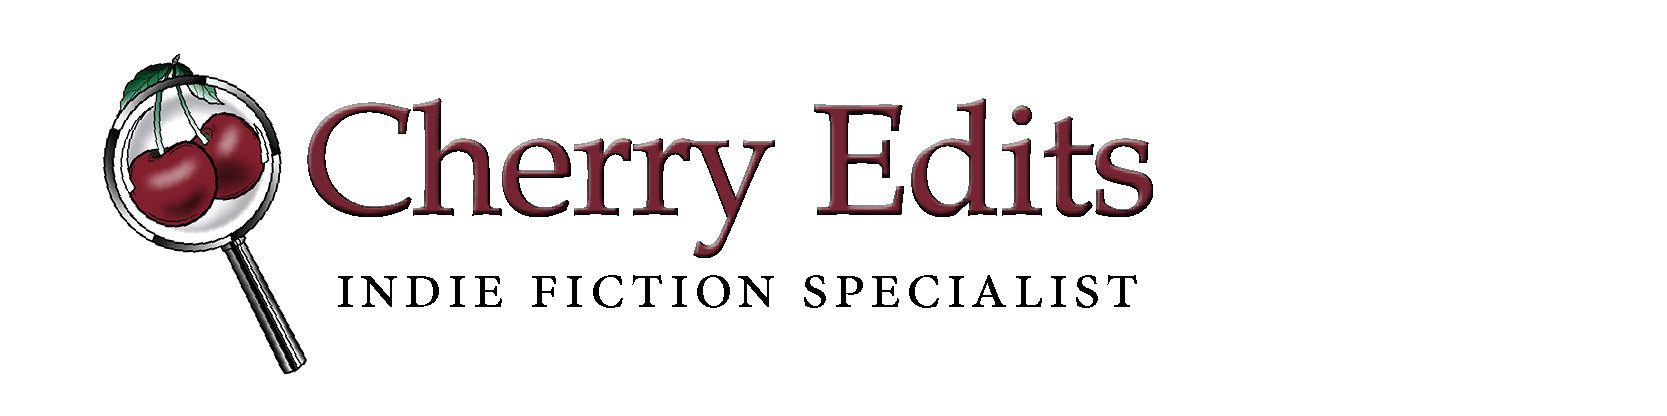 Cherry Edits Indie Fiction Specialist logo. Two cherries inside a magnifying glass